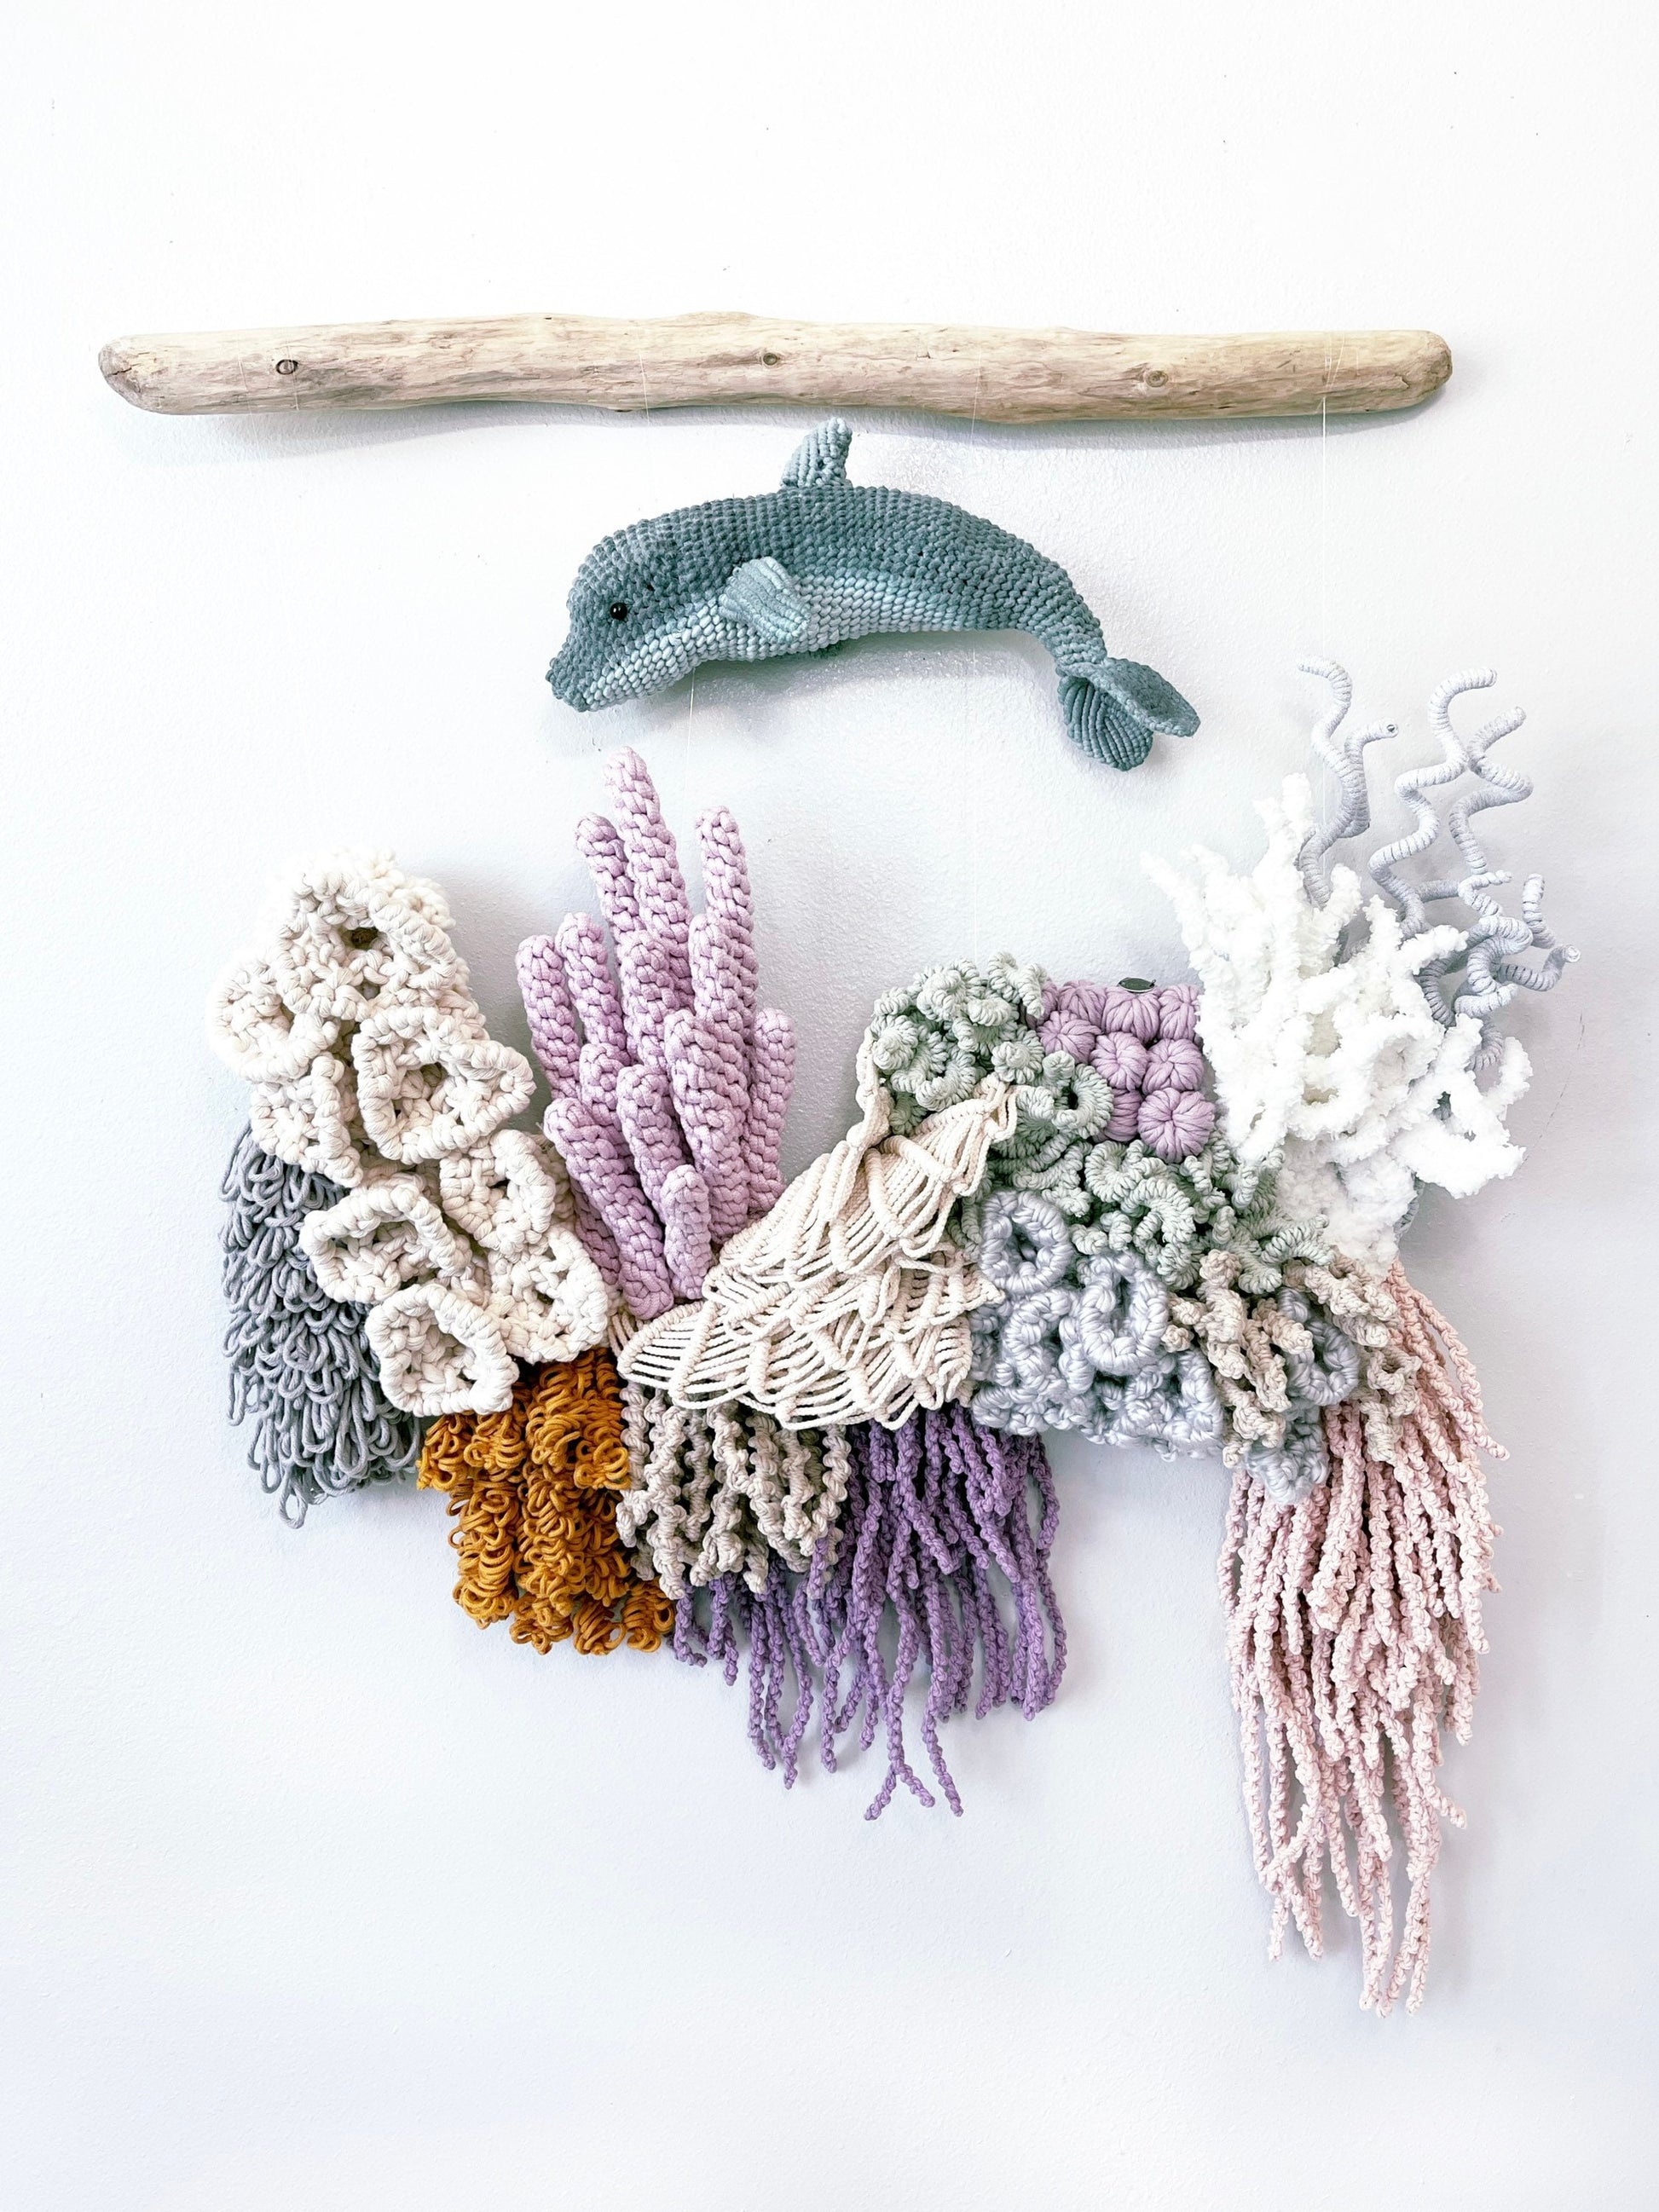 COMMISSION ONLY ART//Macrame Coral Reef Art/ Fiber Coral Reef/ Barrier reef art / Nautical Macrame Art